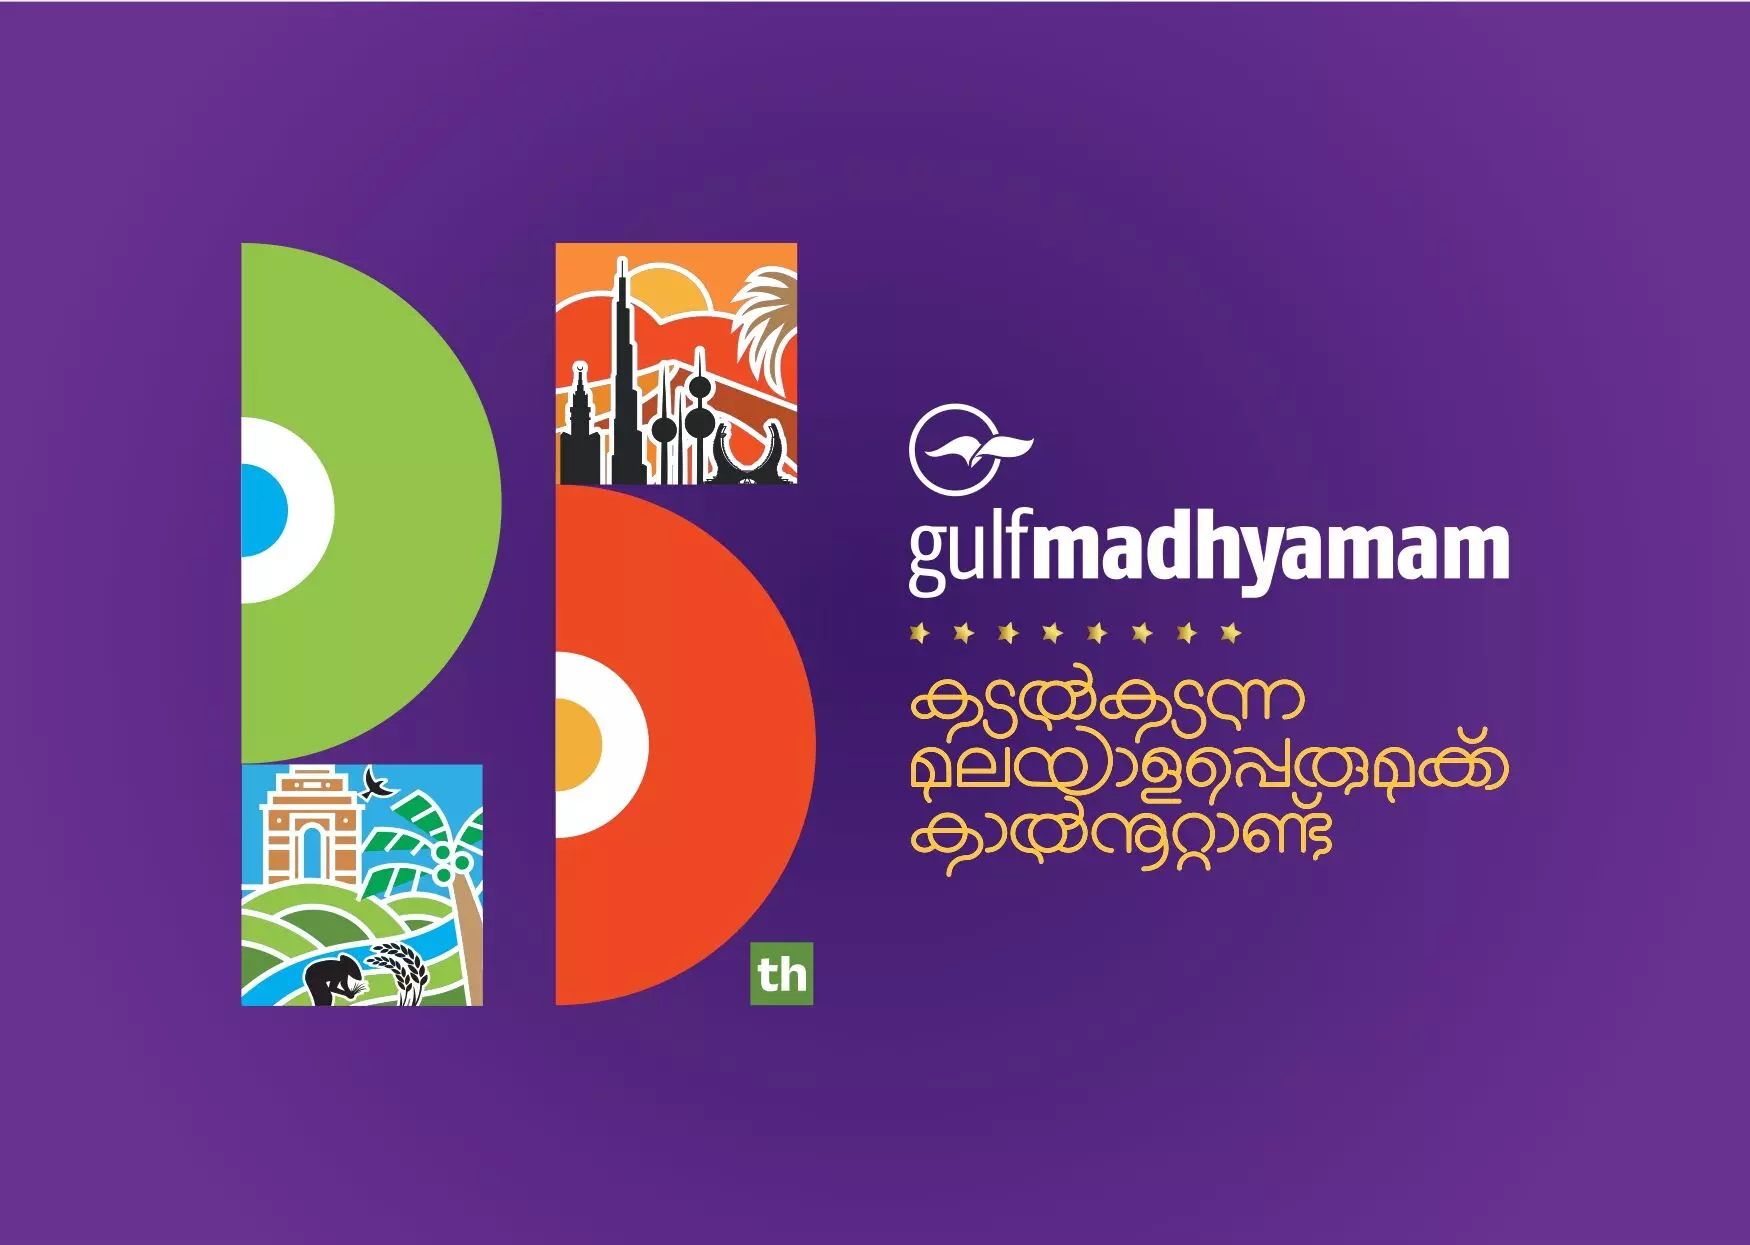 Gulf Madhyamam turns 25 today, pioneering excellence in media